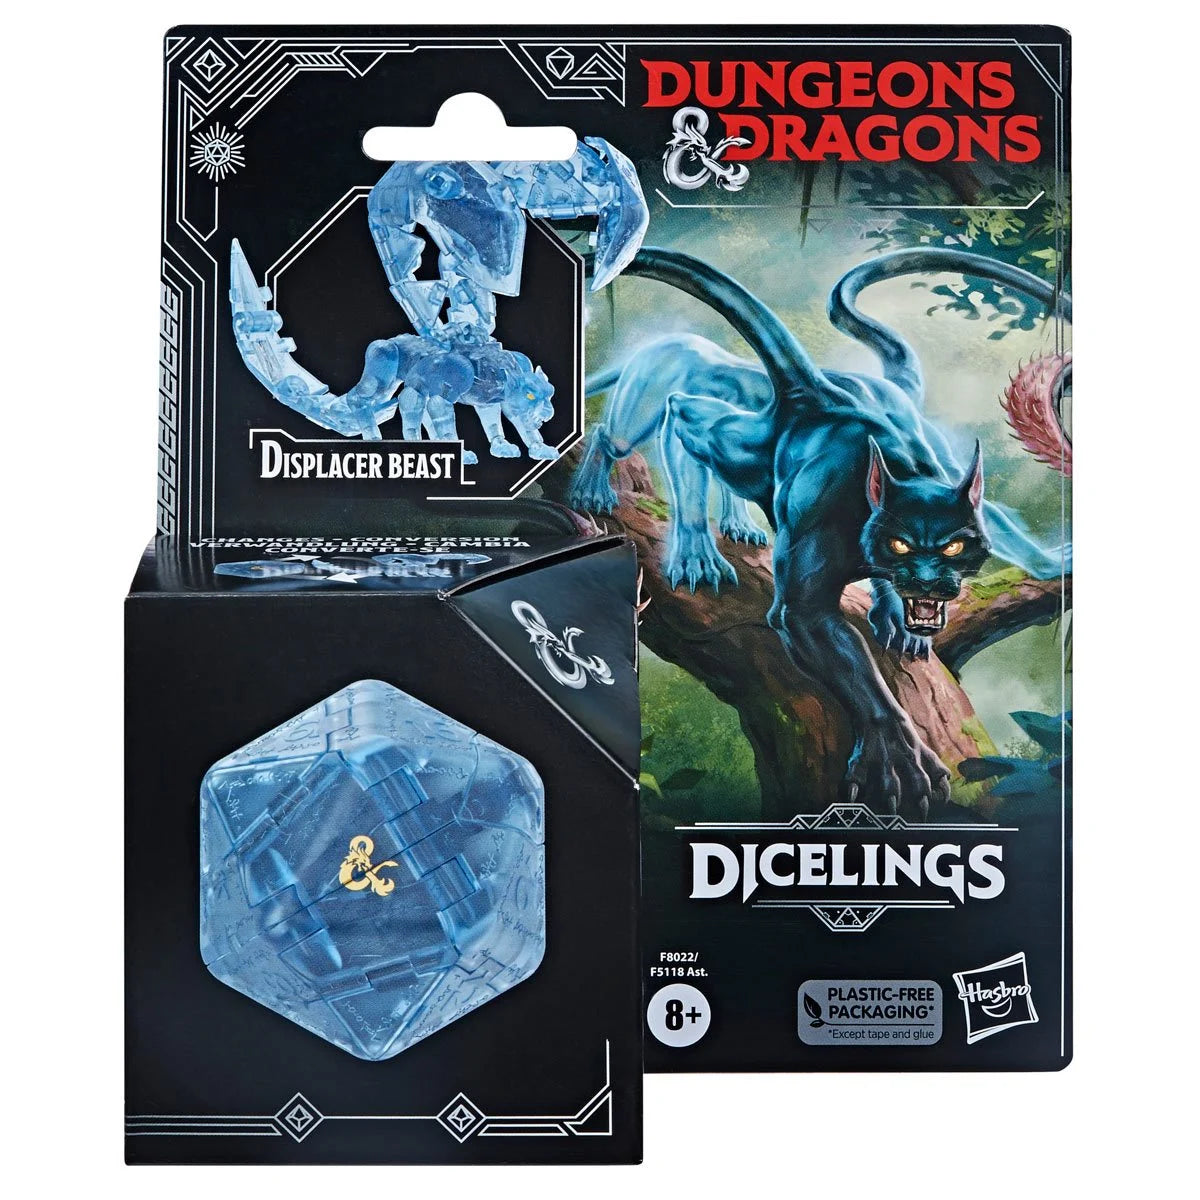 Dungeons & Dragons Honor Among Thieves D&D Dicelings Blue Displacer Beast Converting Figure packaging box front view - Heretoserveyou